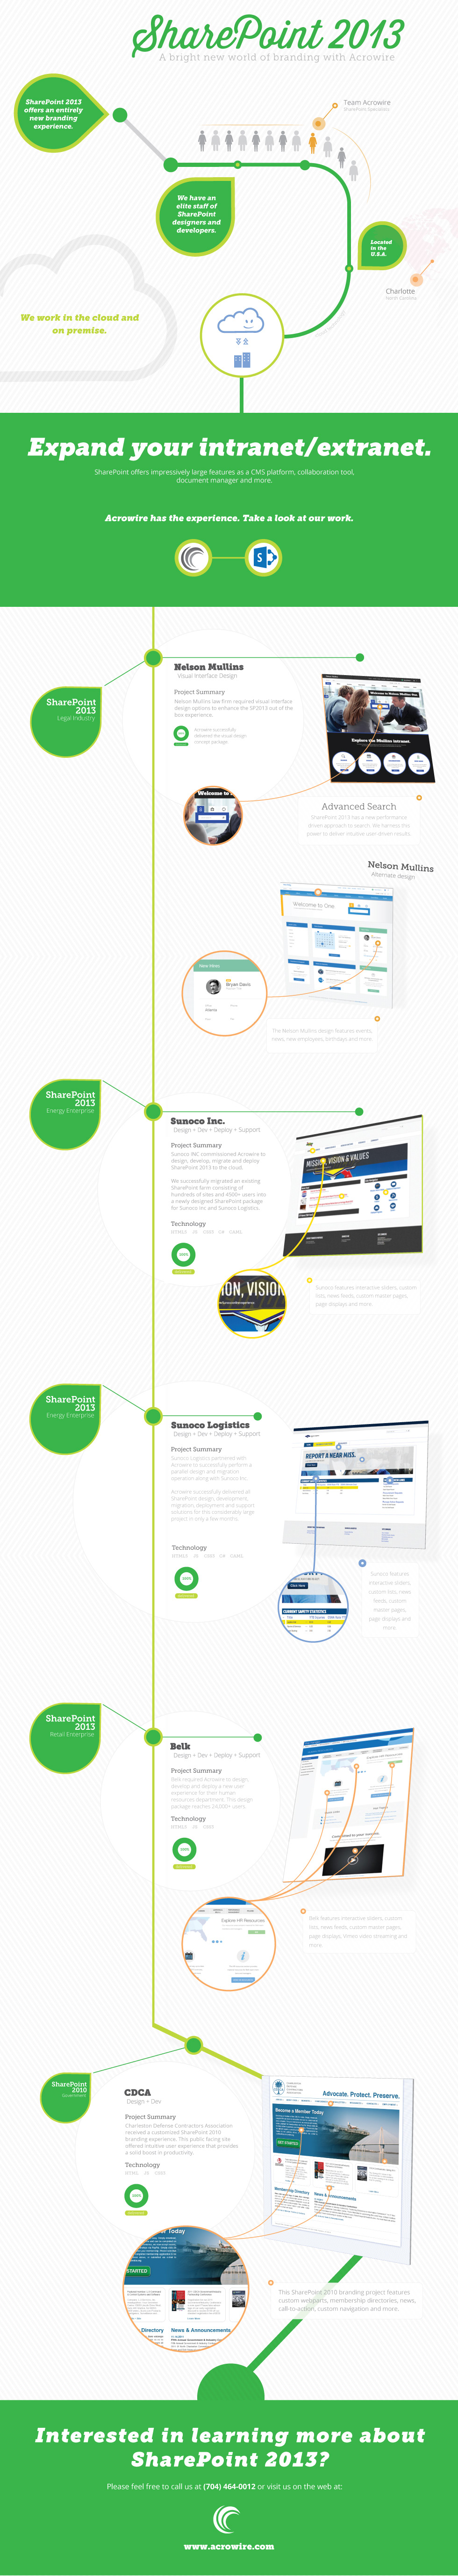 Acrowire infographic Sharepoint enterprise